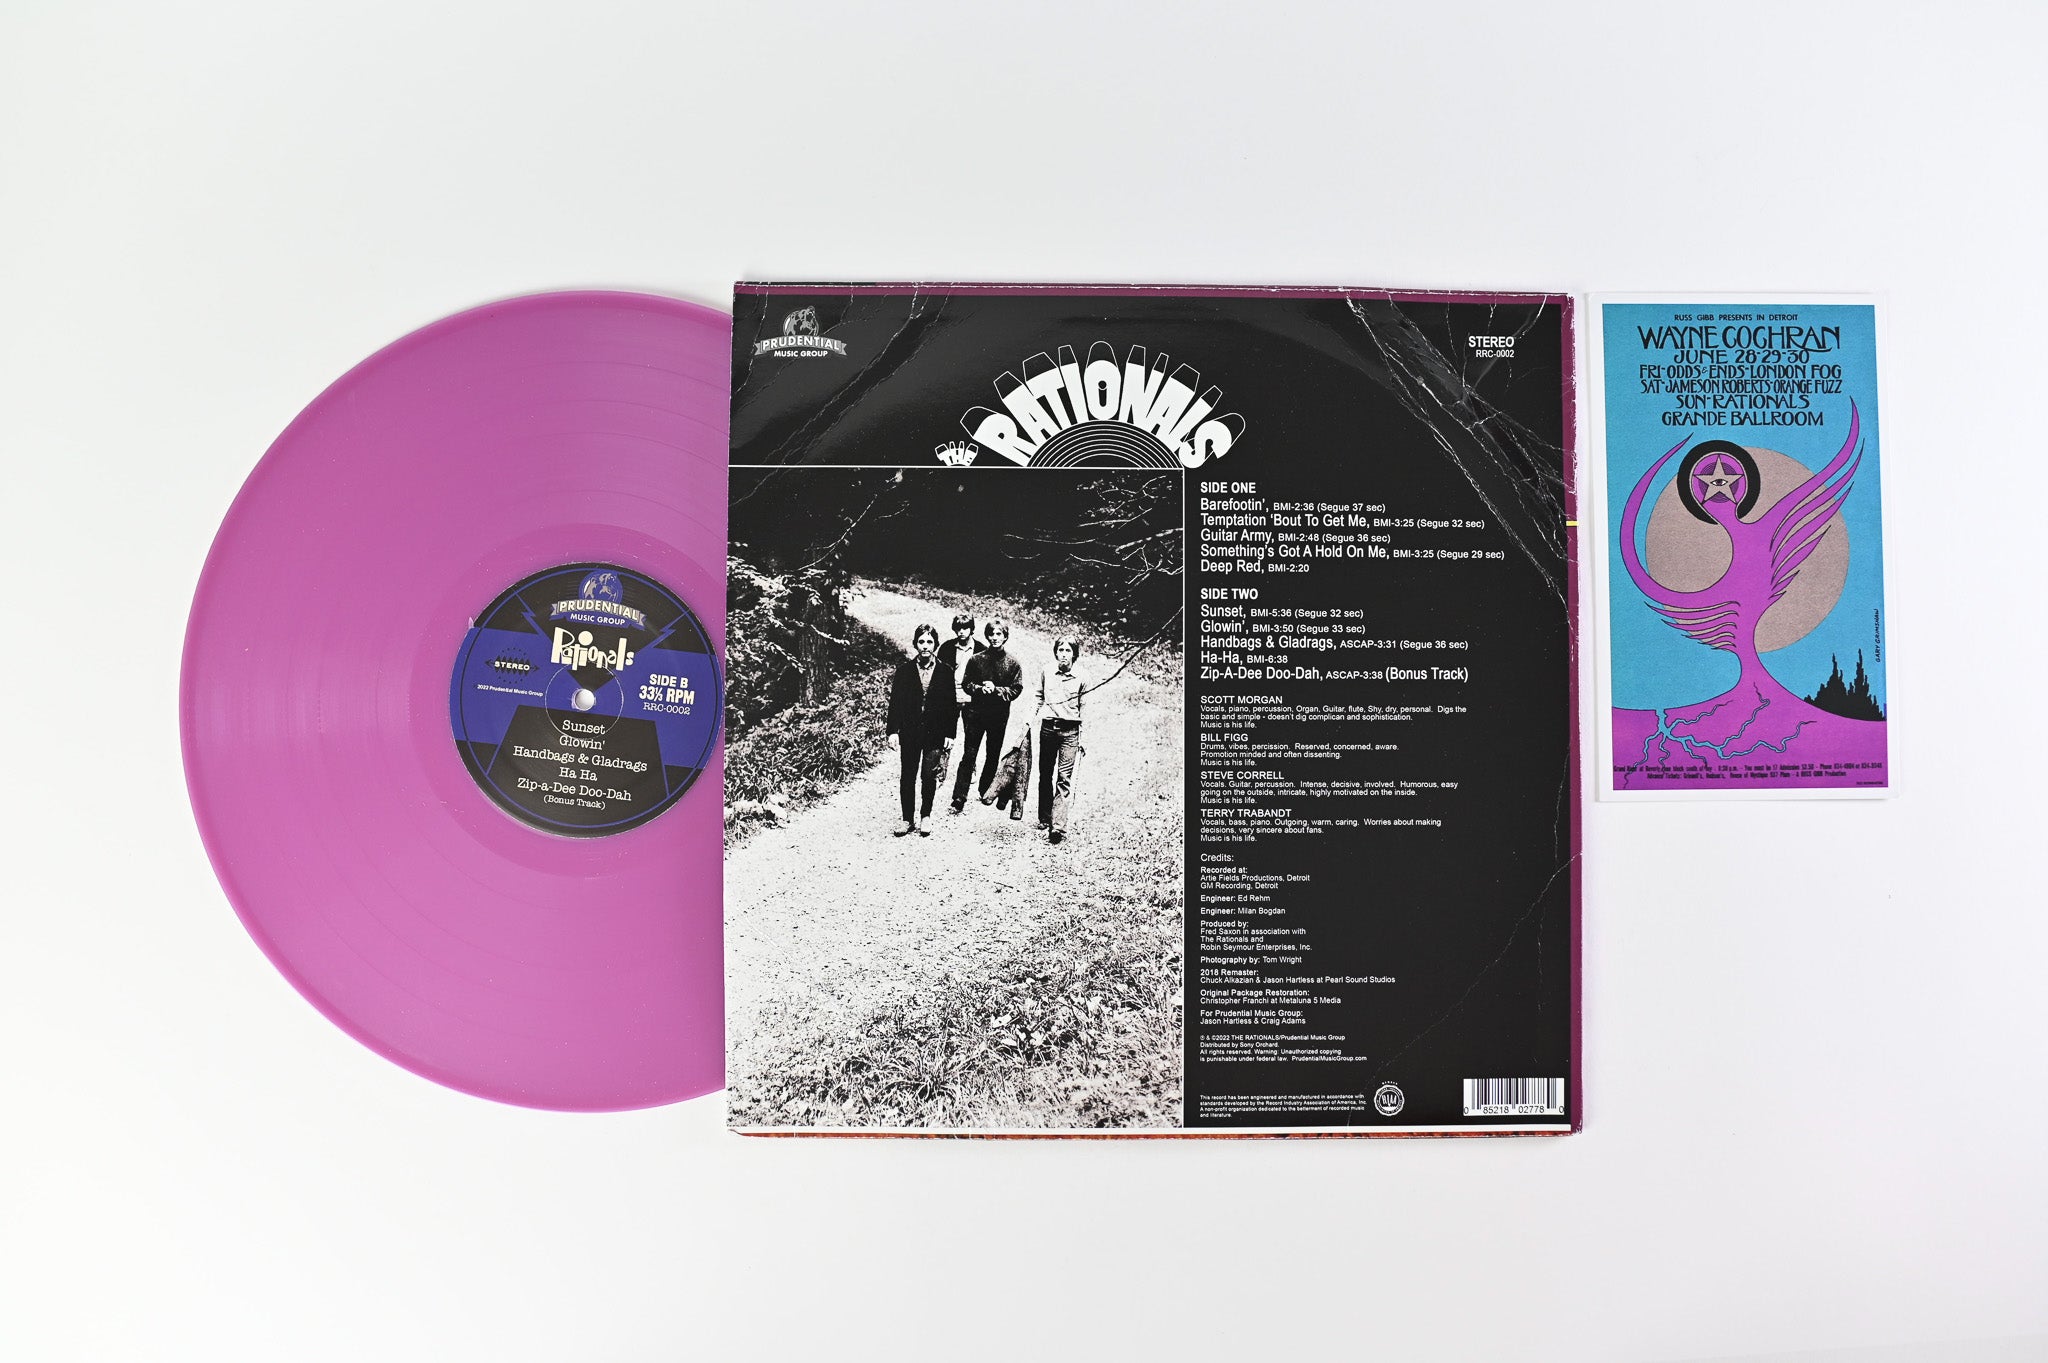 The Rationals - The Rationals on Prudential Music Group - Lavender Vinyl